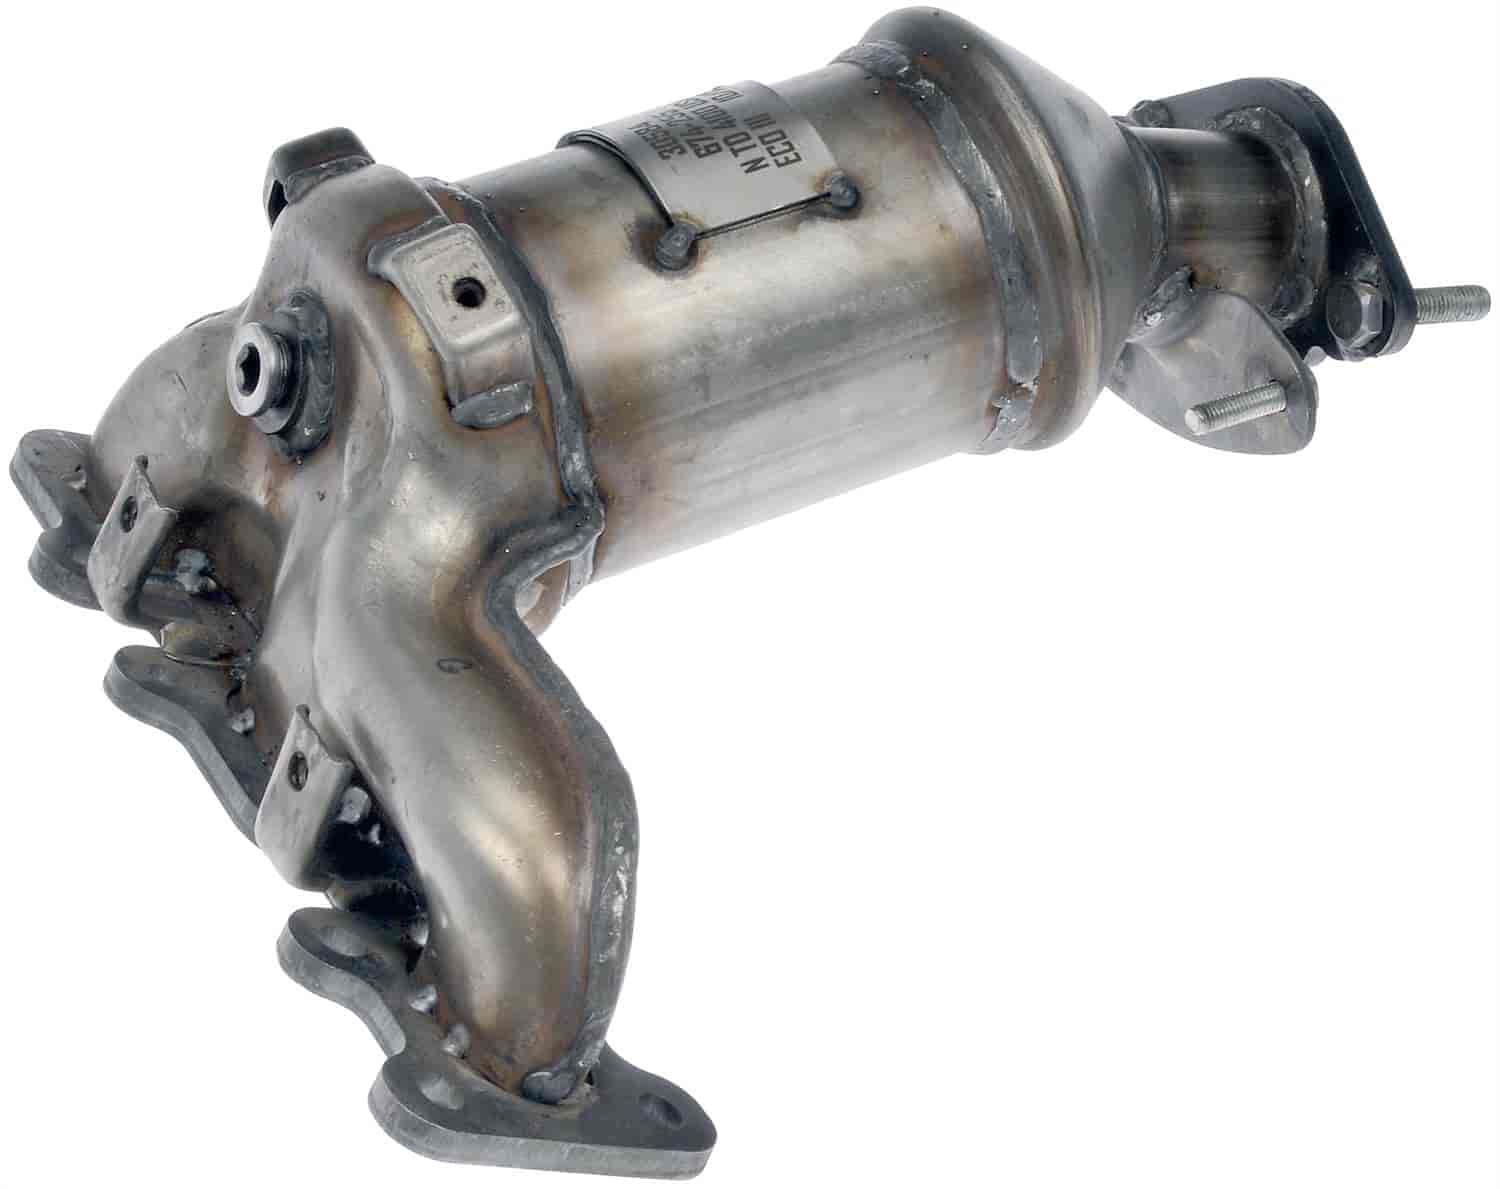 Manifold Converter Not Carb Compliant Not For Legal Sale In NY Ca